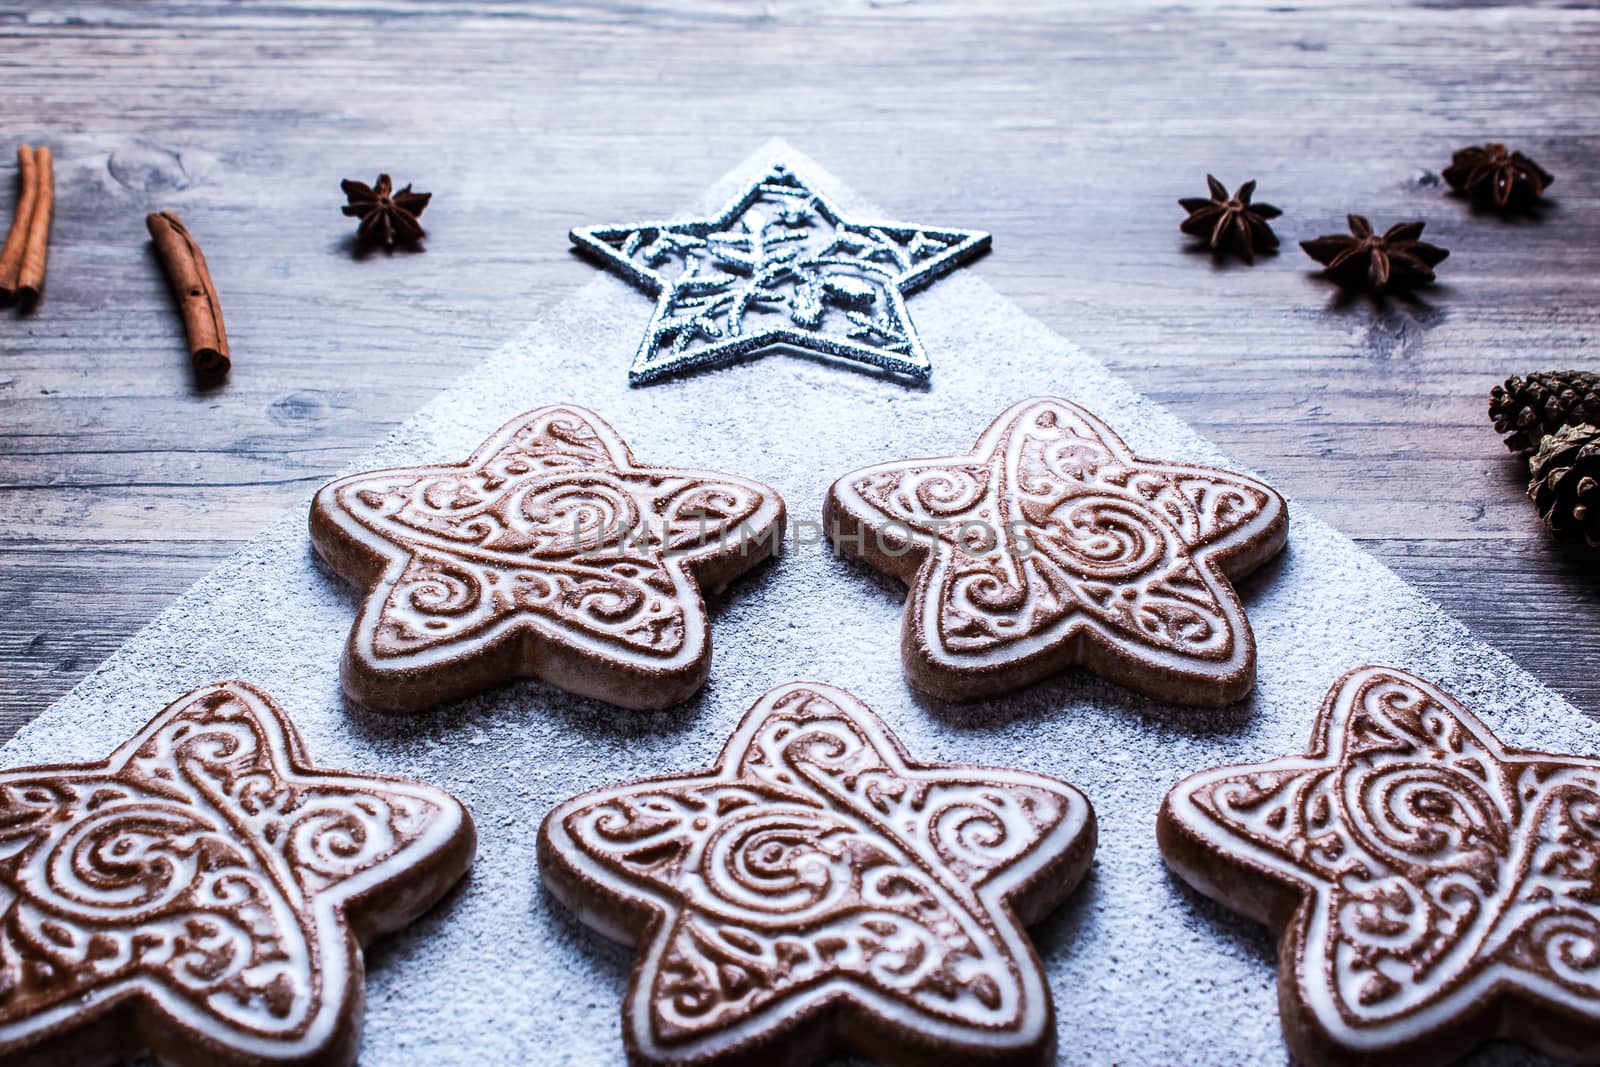  2020 Christmas new year concept of cookies in the shape of a Ch by YevgeniySam